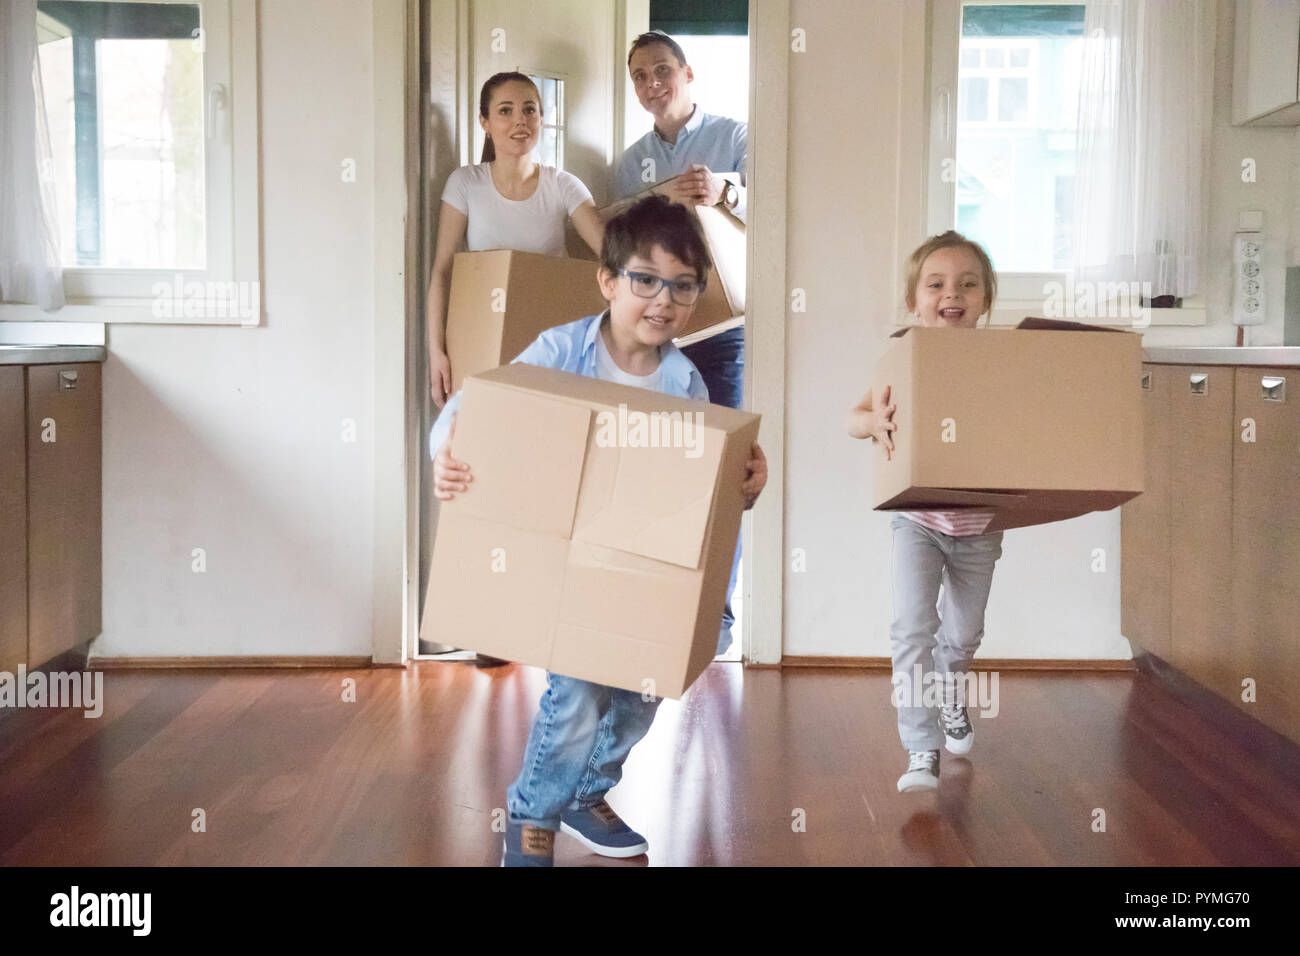 Family with little kids arrive at new home Stock Photo